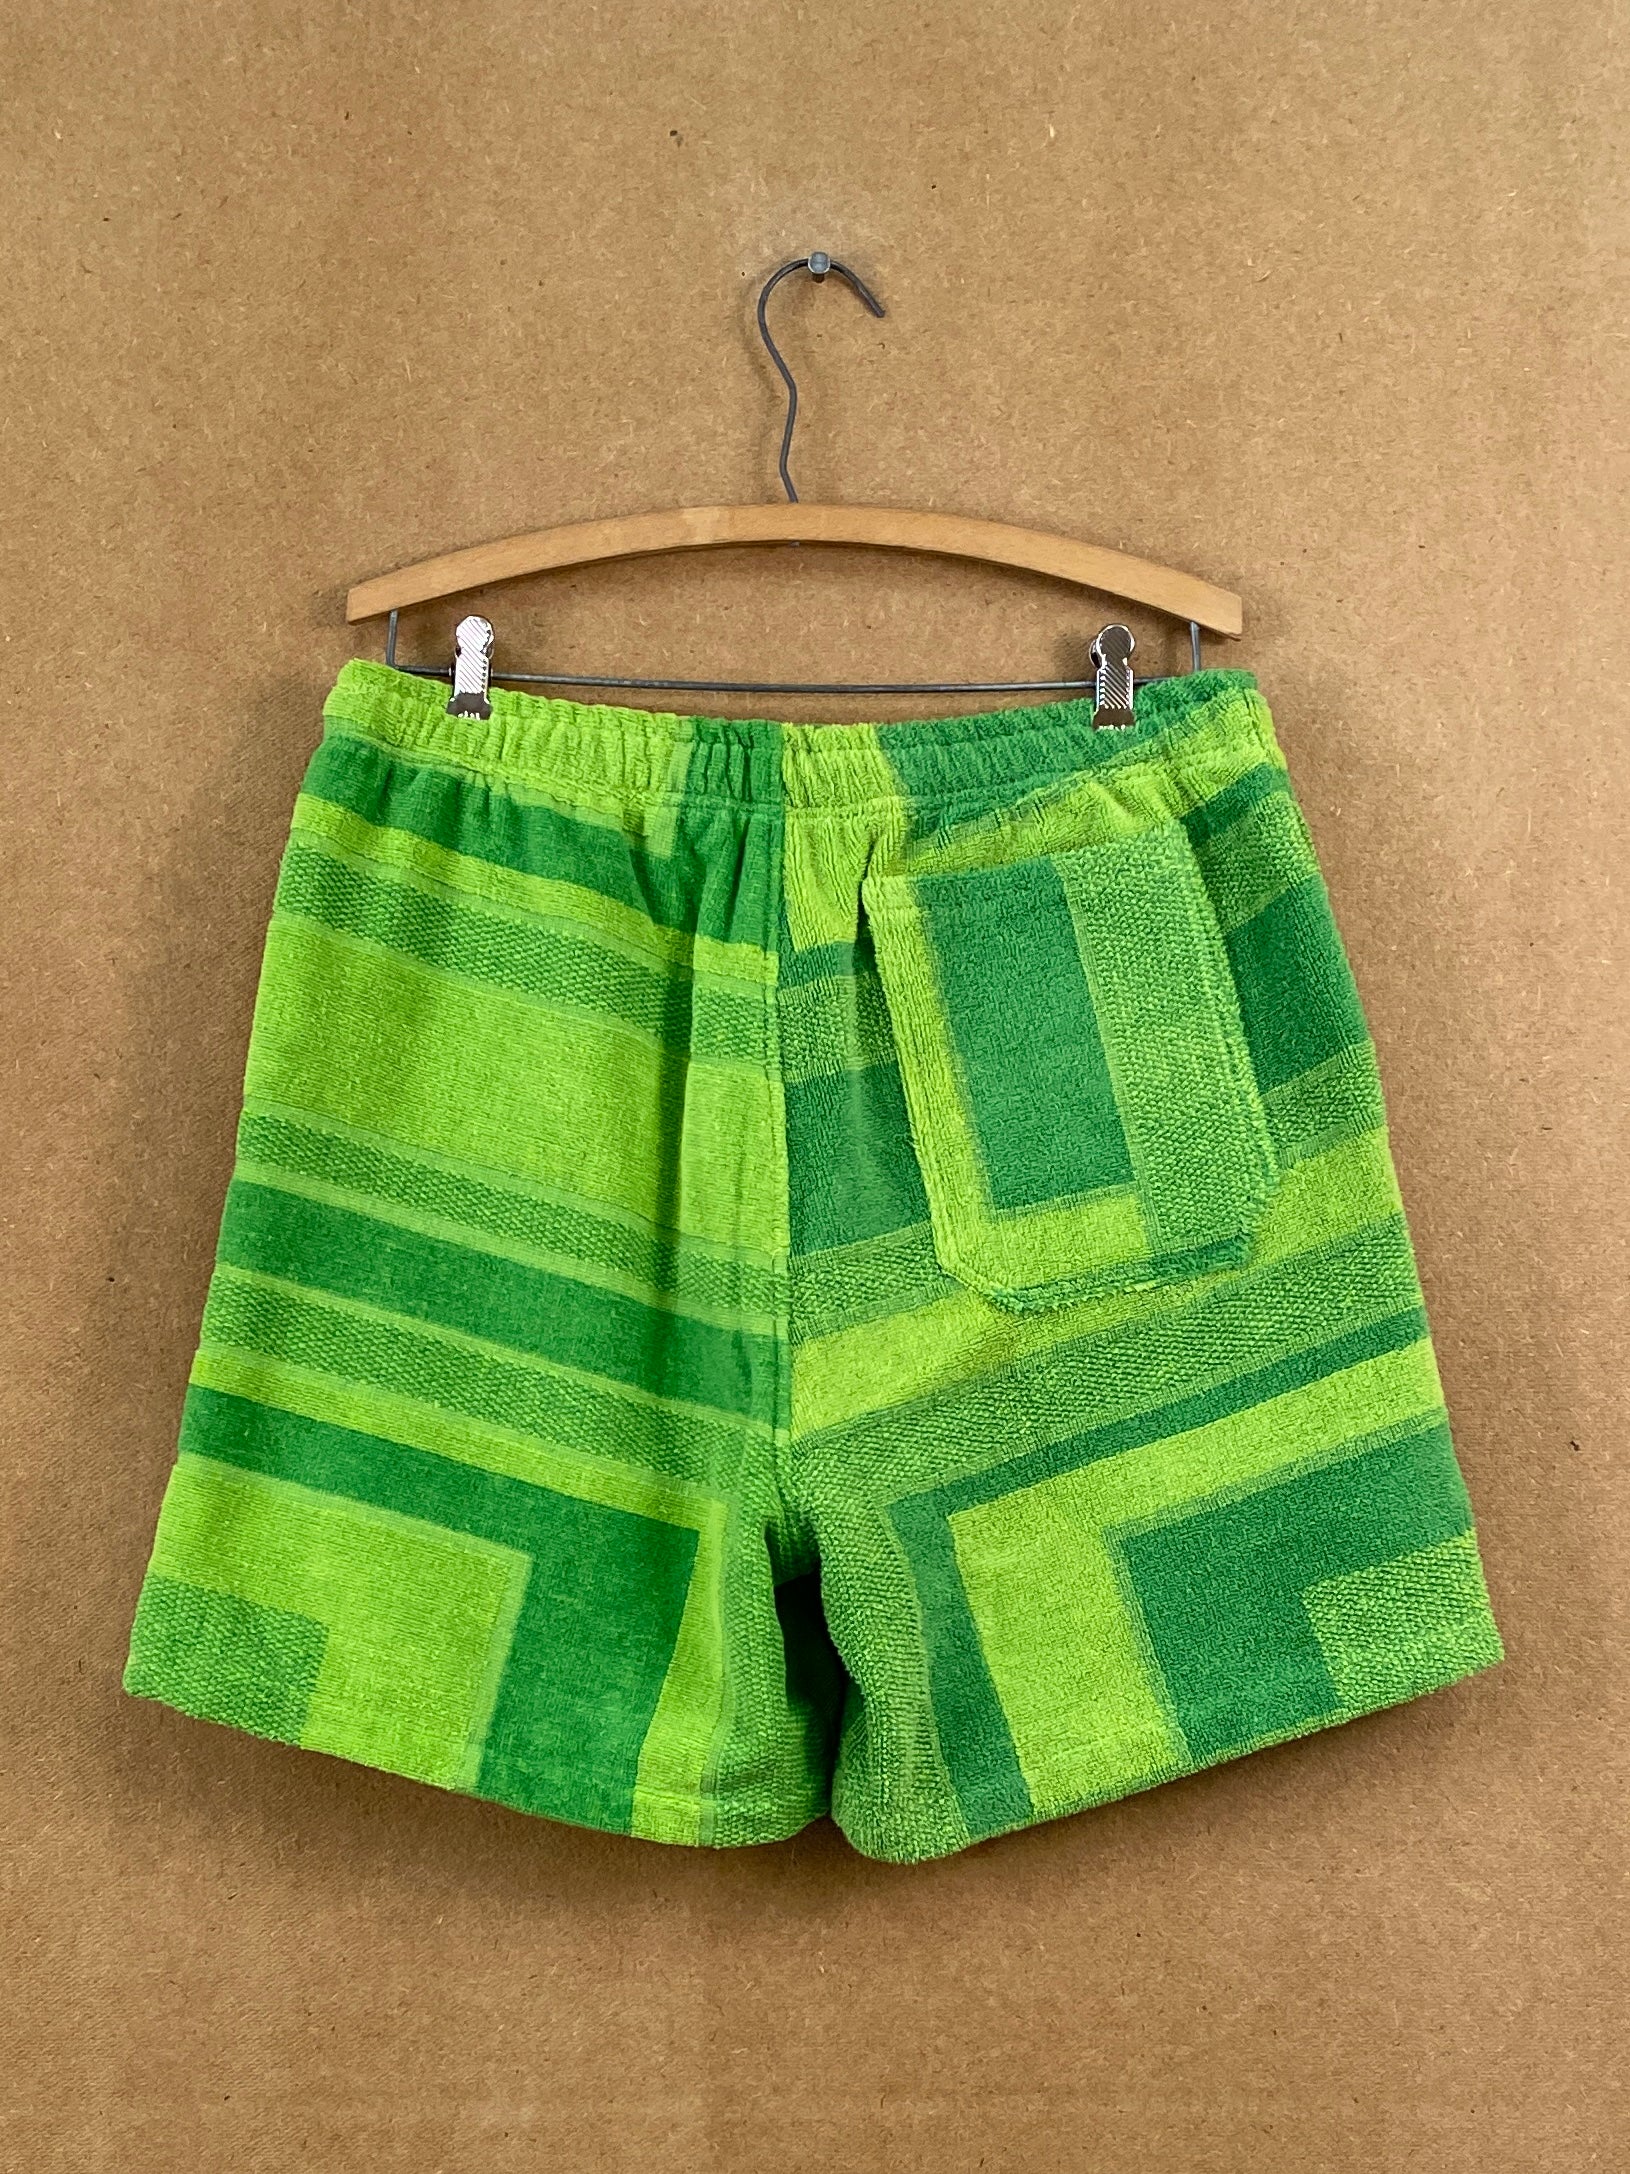 Lime Stripe Towel Rugby Shorts - S/M